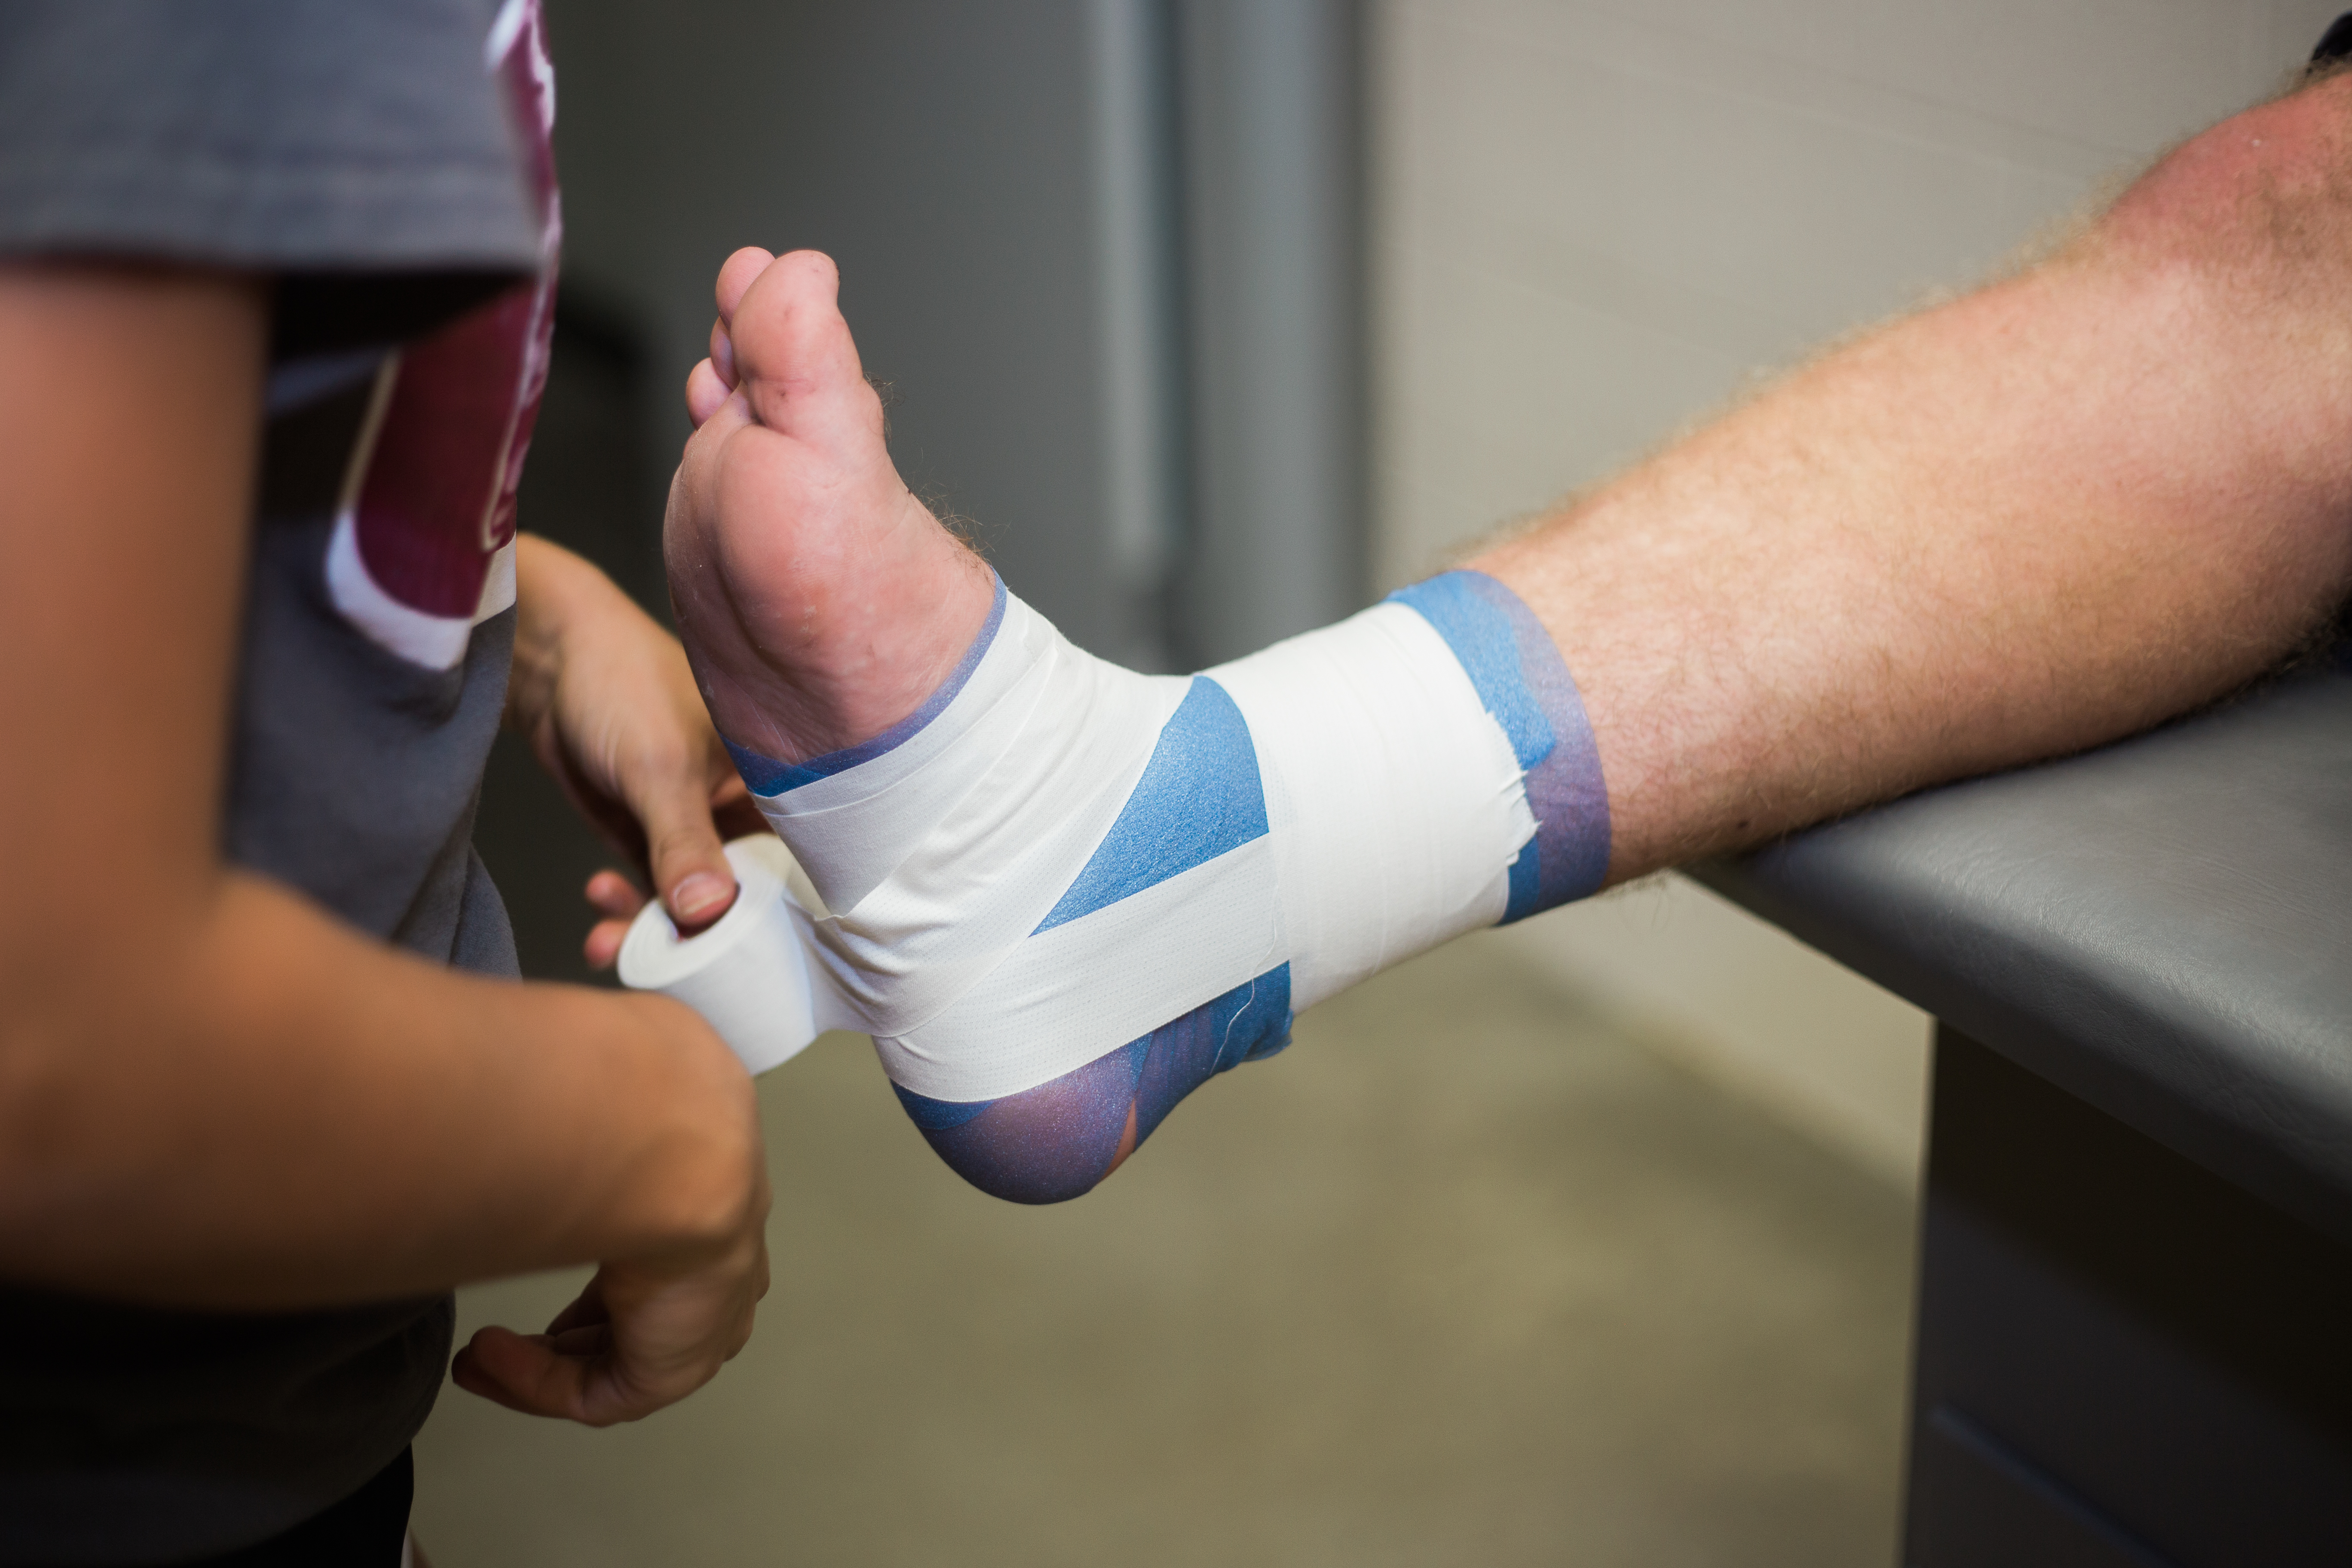 Athletic Tape Usage & How to Do It Correctly